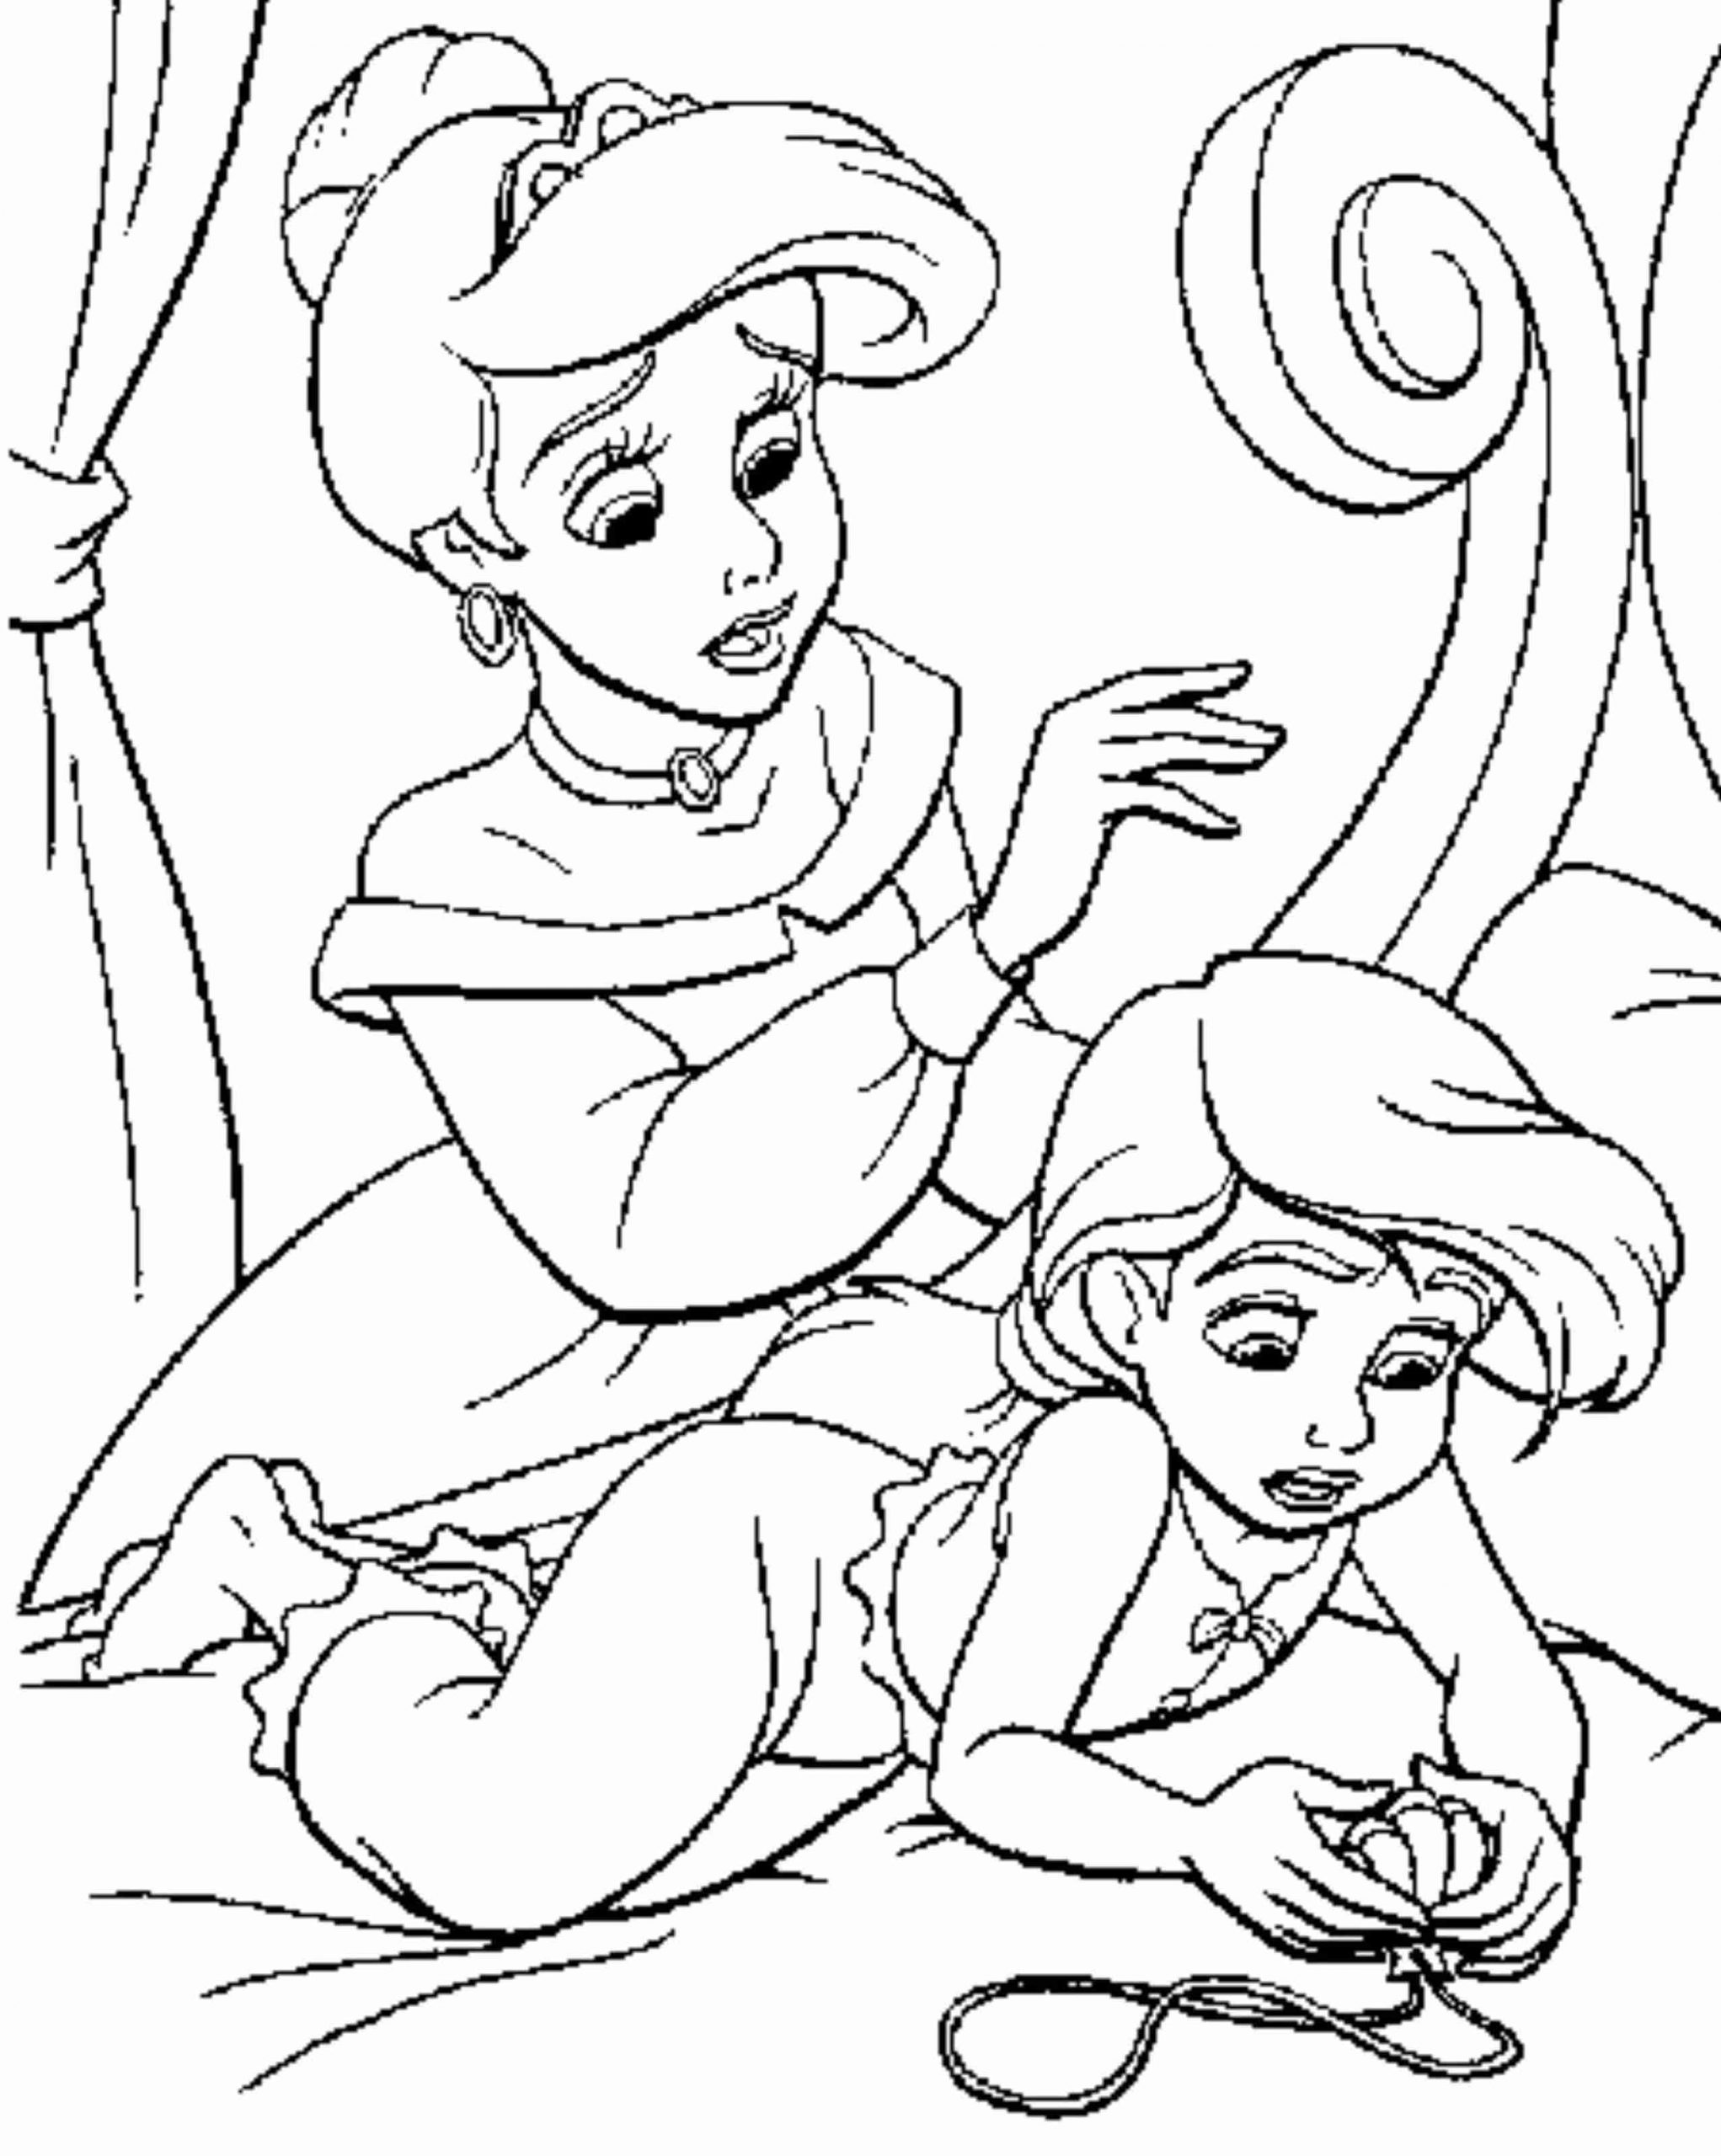 The Little Mermaid 20 Coloring Pages   Coloring Home